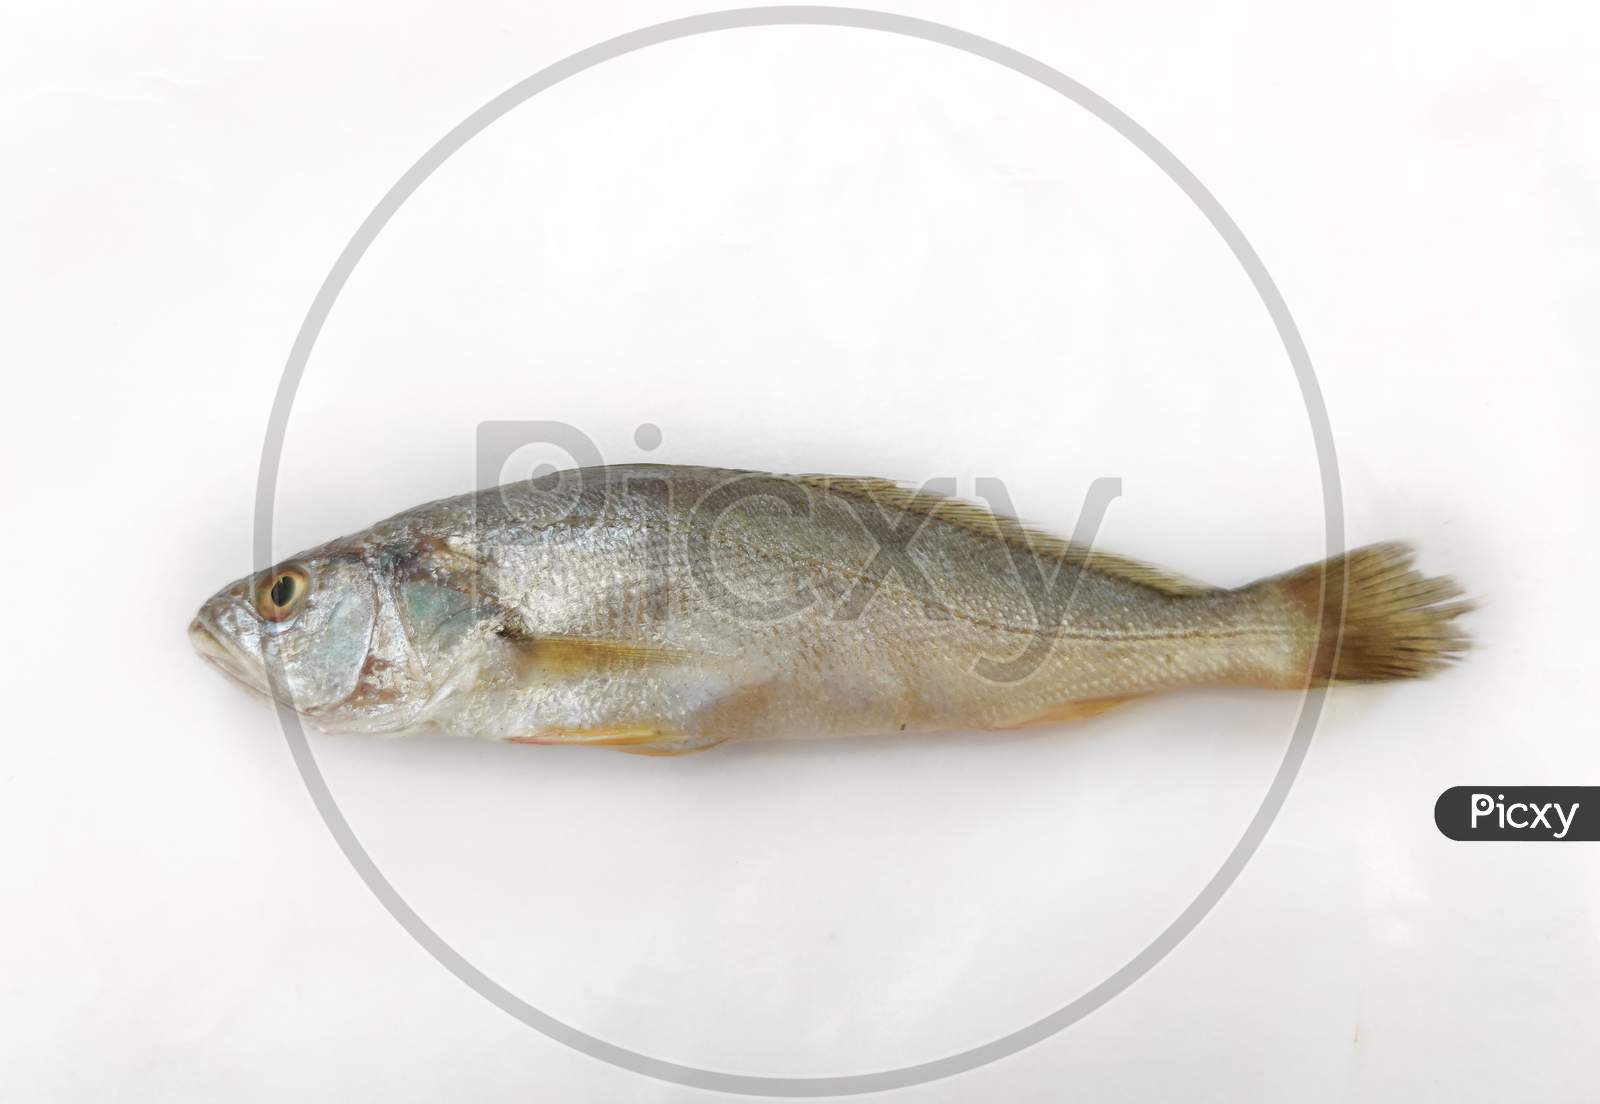 Closeup View Of Silver Croaker Fish Isolated On White Background.Selective Focus.